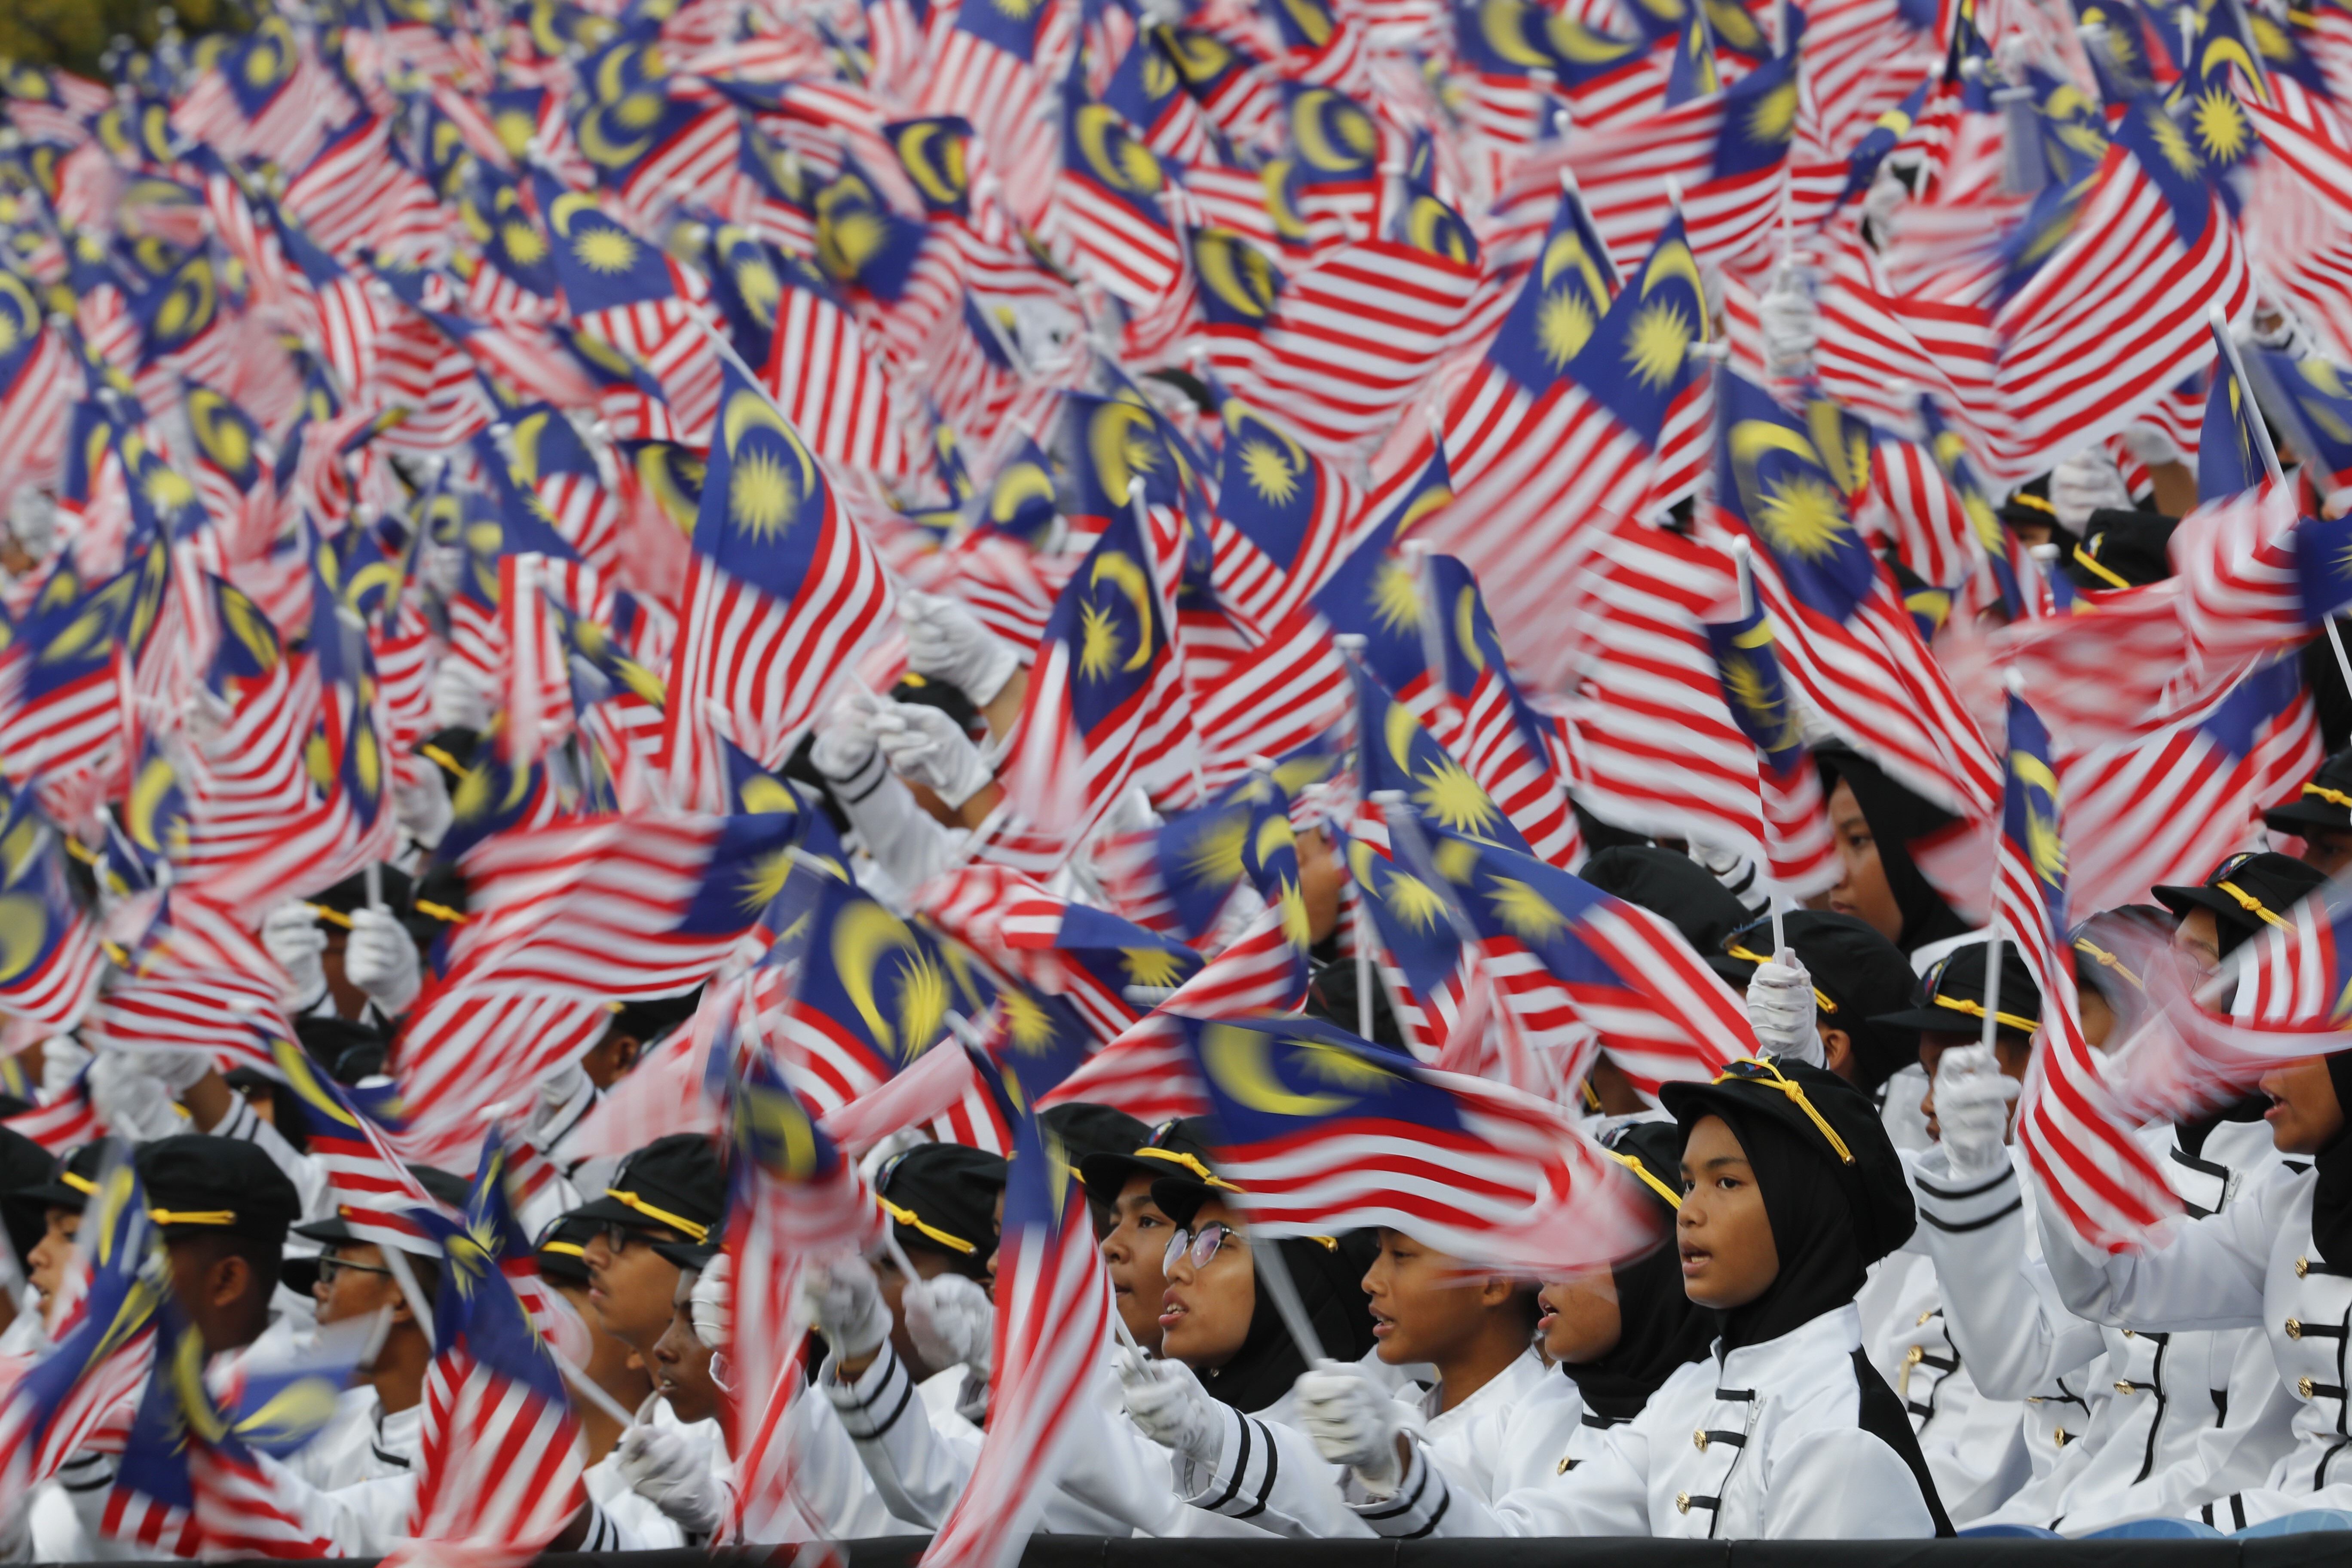 Students wave national flags during Independence Day celebrations in Malaysia. Photo: AP